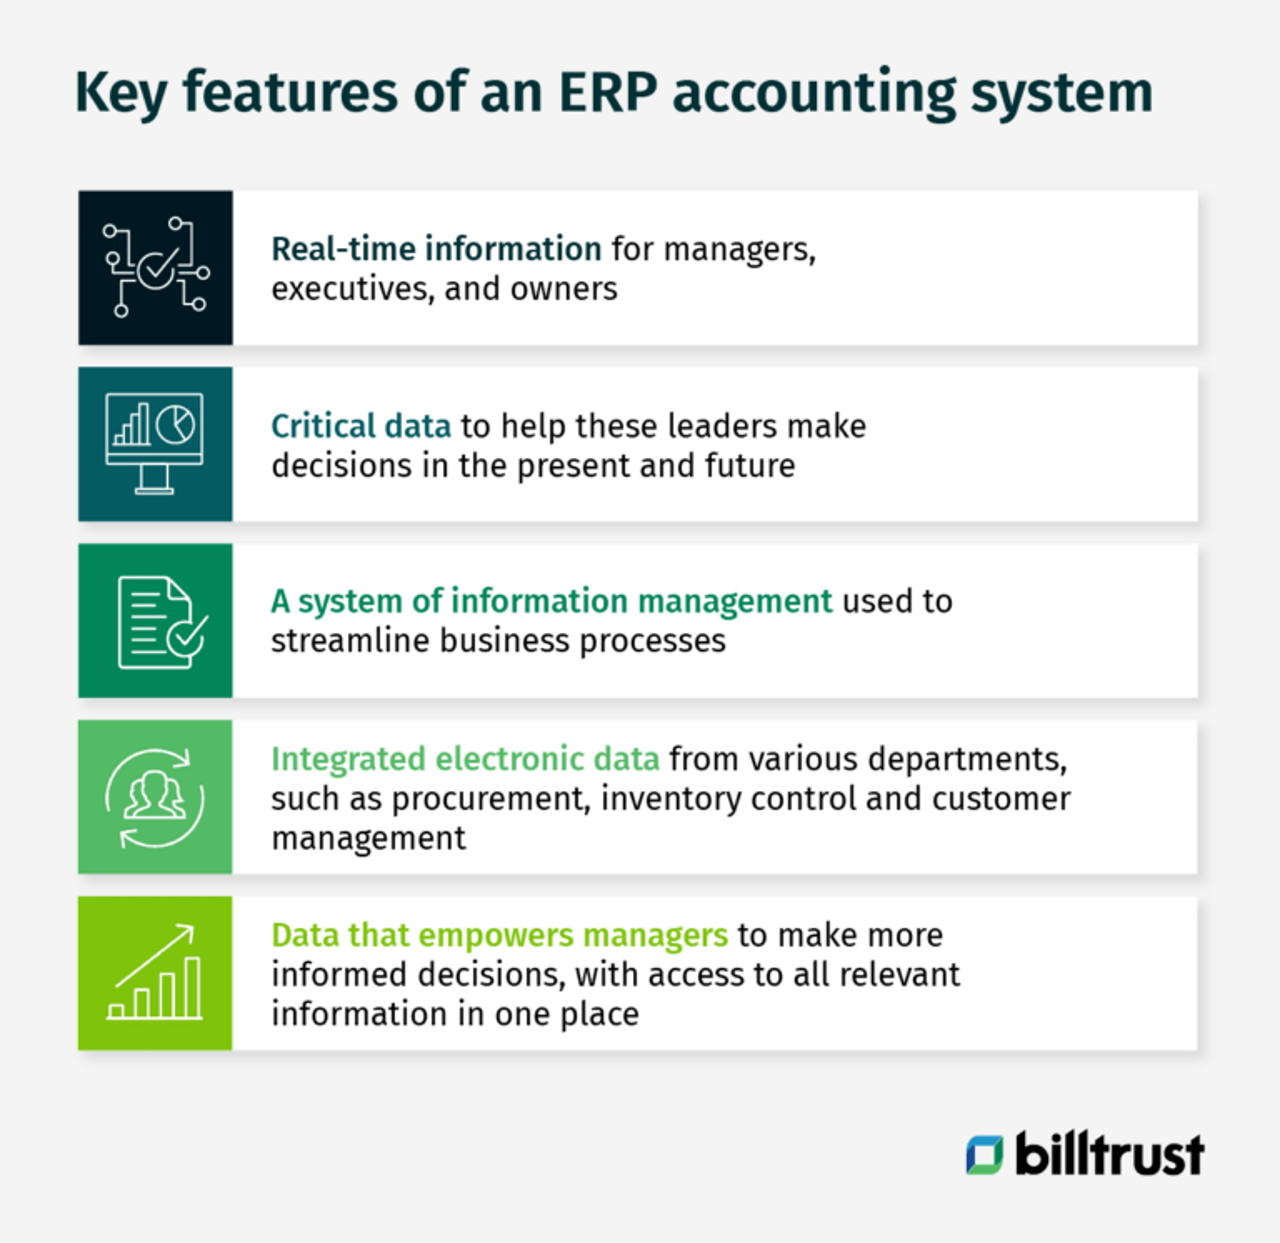 ERP systems and AR software: key features of an erp accounting system